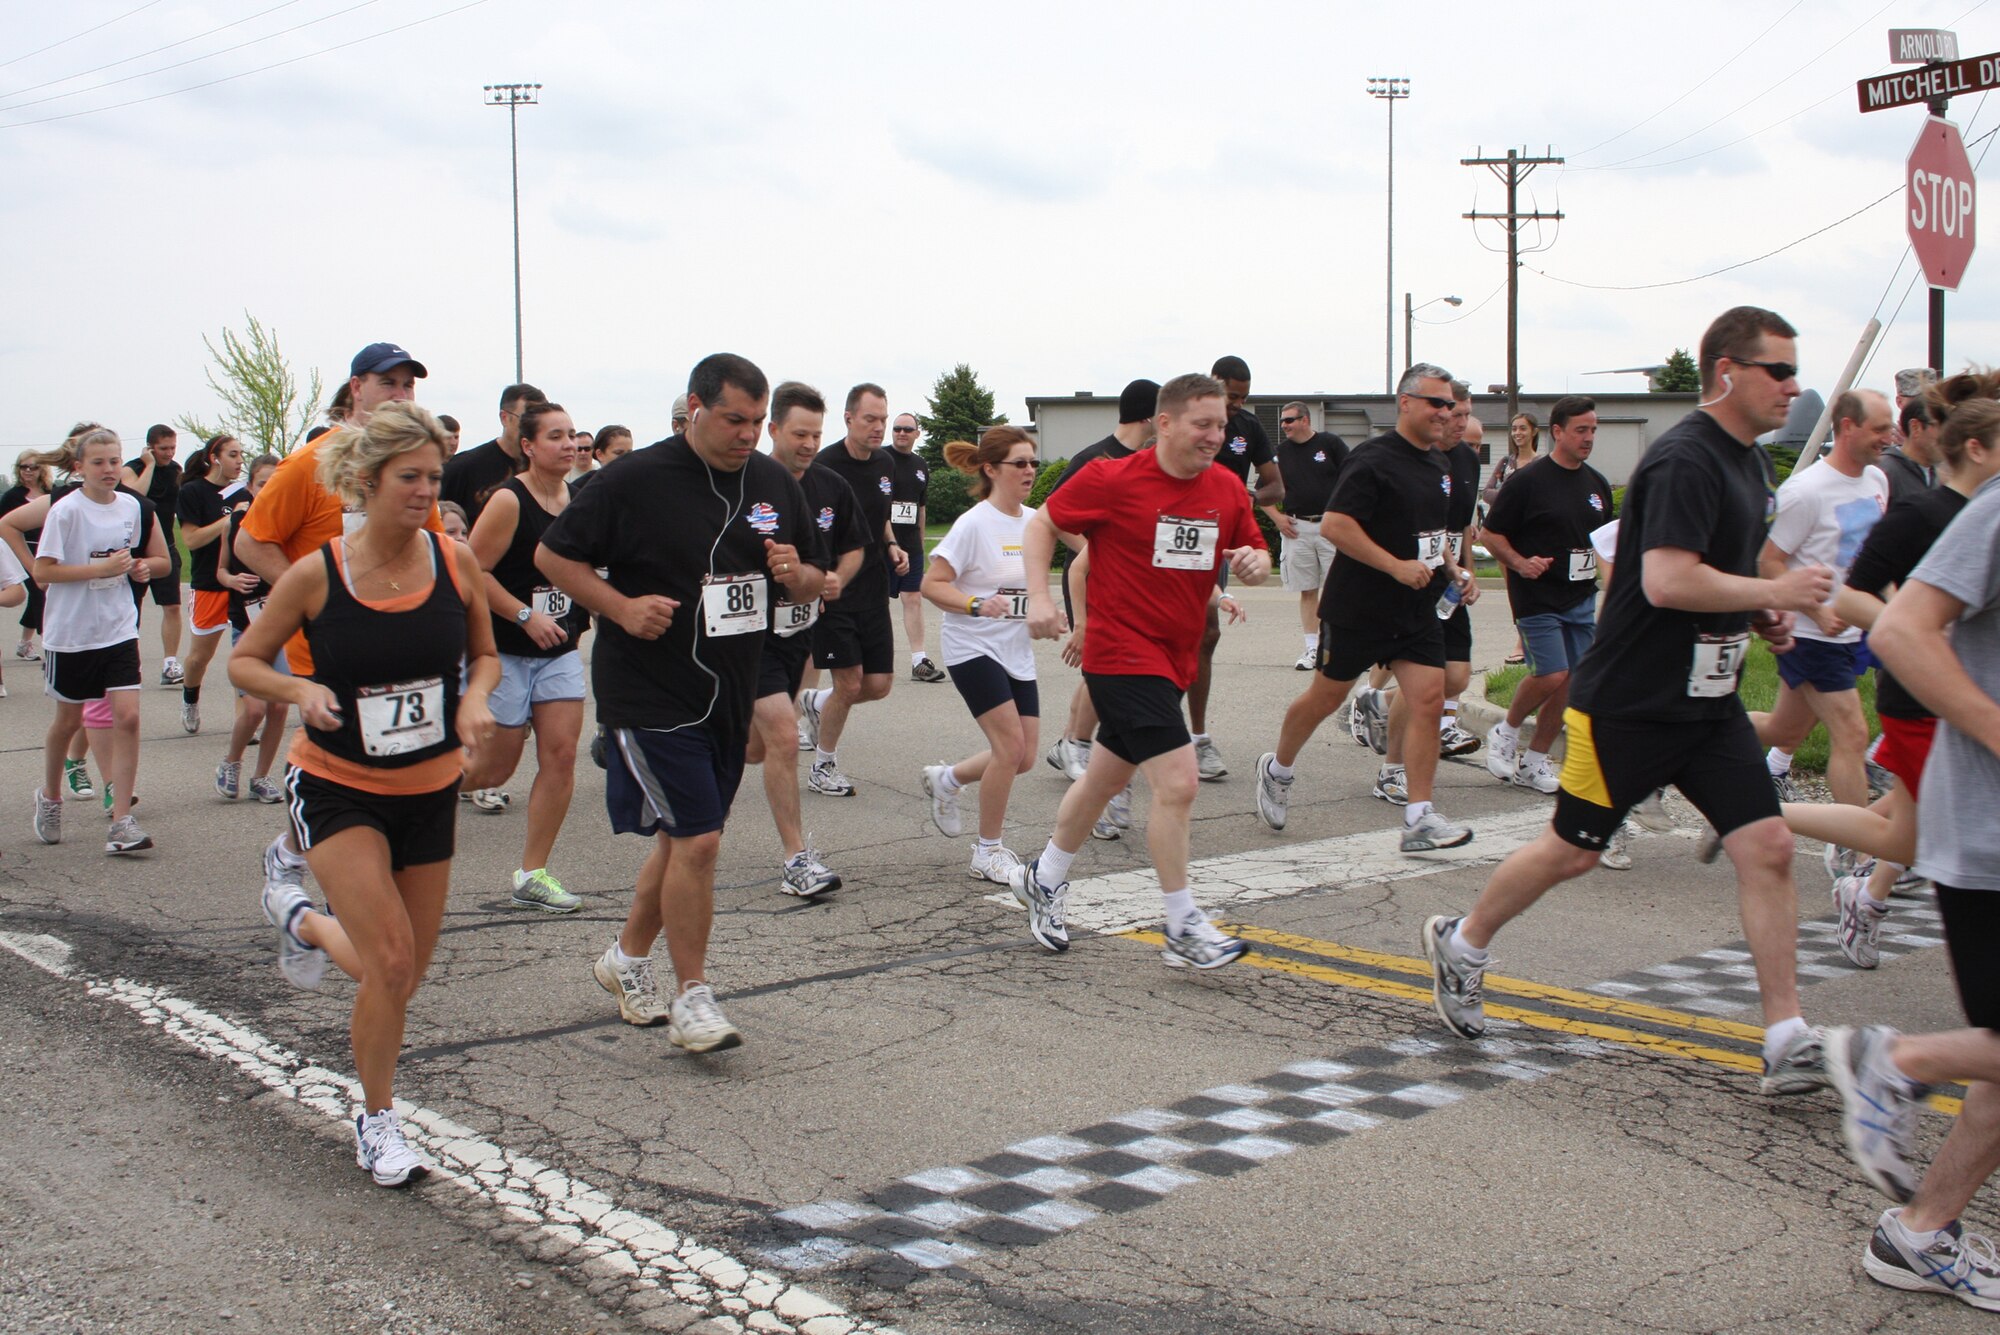 WRIGHT-PATTERSON AIR FORCE BASE, Ohio - The 89th Airlift Squadron hosted a 5K run in memory of Lt. Col. Dan Witt, who was assigned to the squadron.  Plaques were awarded to the first place winners in the men, women and children categories. (Air Force photo/Stacy Vaughn)